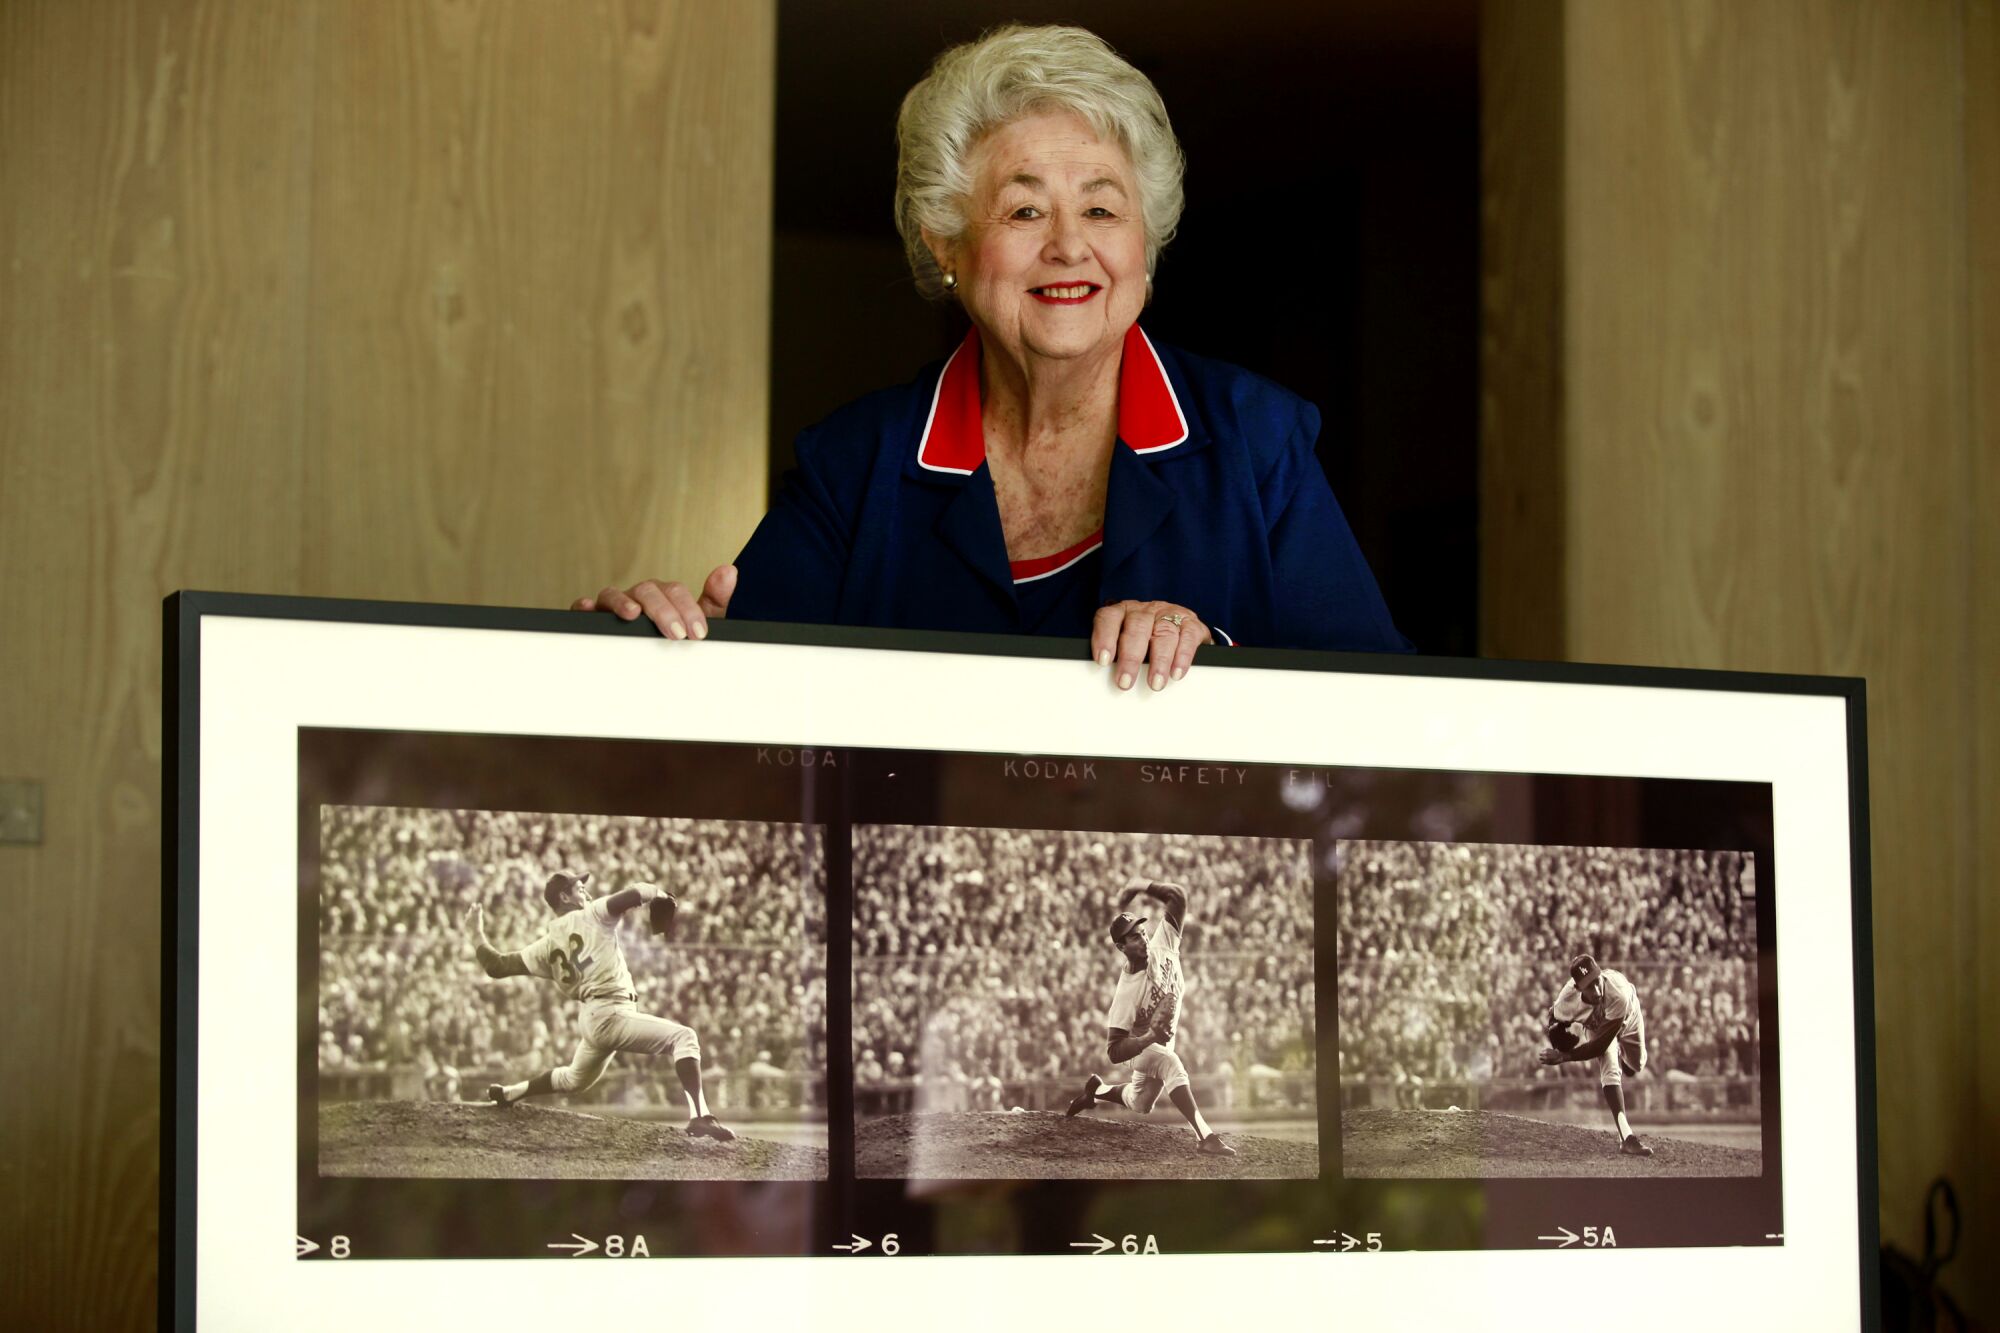 Roz with photo of Sandy Koufax pitching in 1966. 